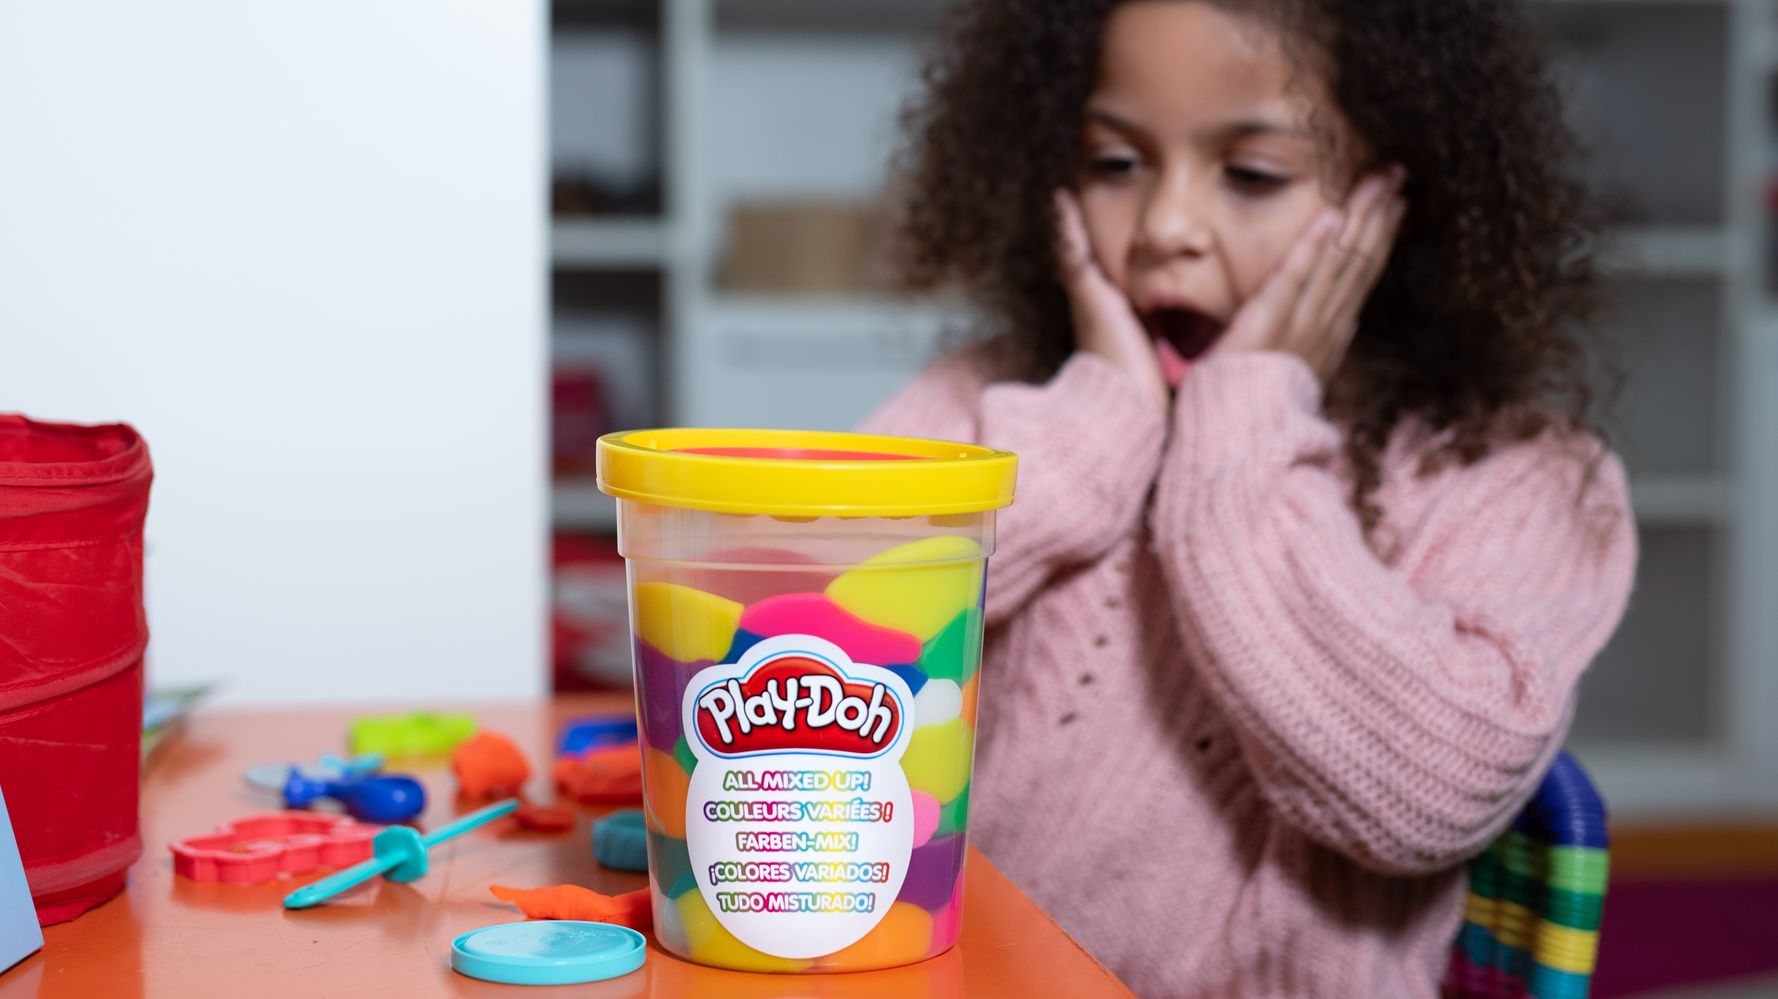 Play-Doh - Less frustration, more organization! This Play-Doh hack